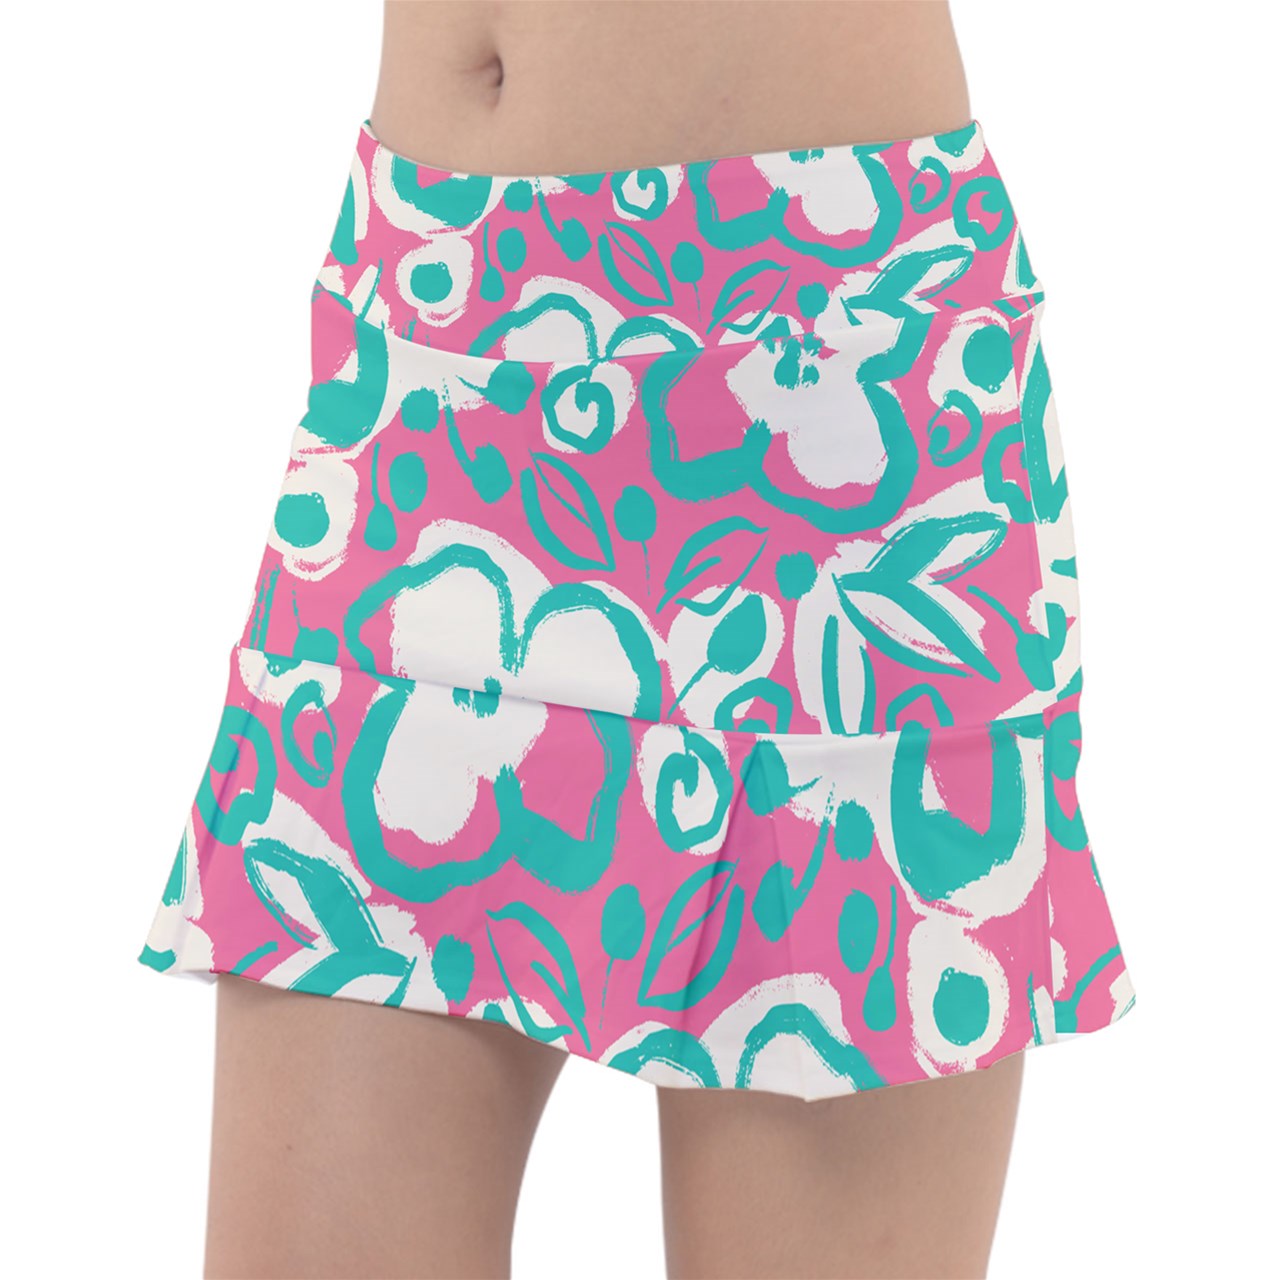 Dizzy Pickle Lesia Blooms PSC Women's Pickleball Classic Skort with Inner Shorts and Pockets